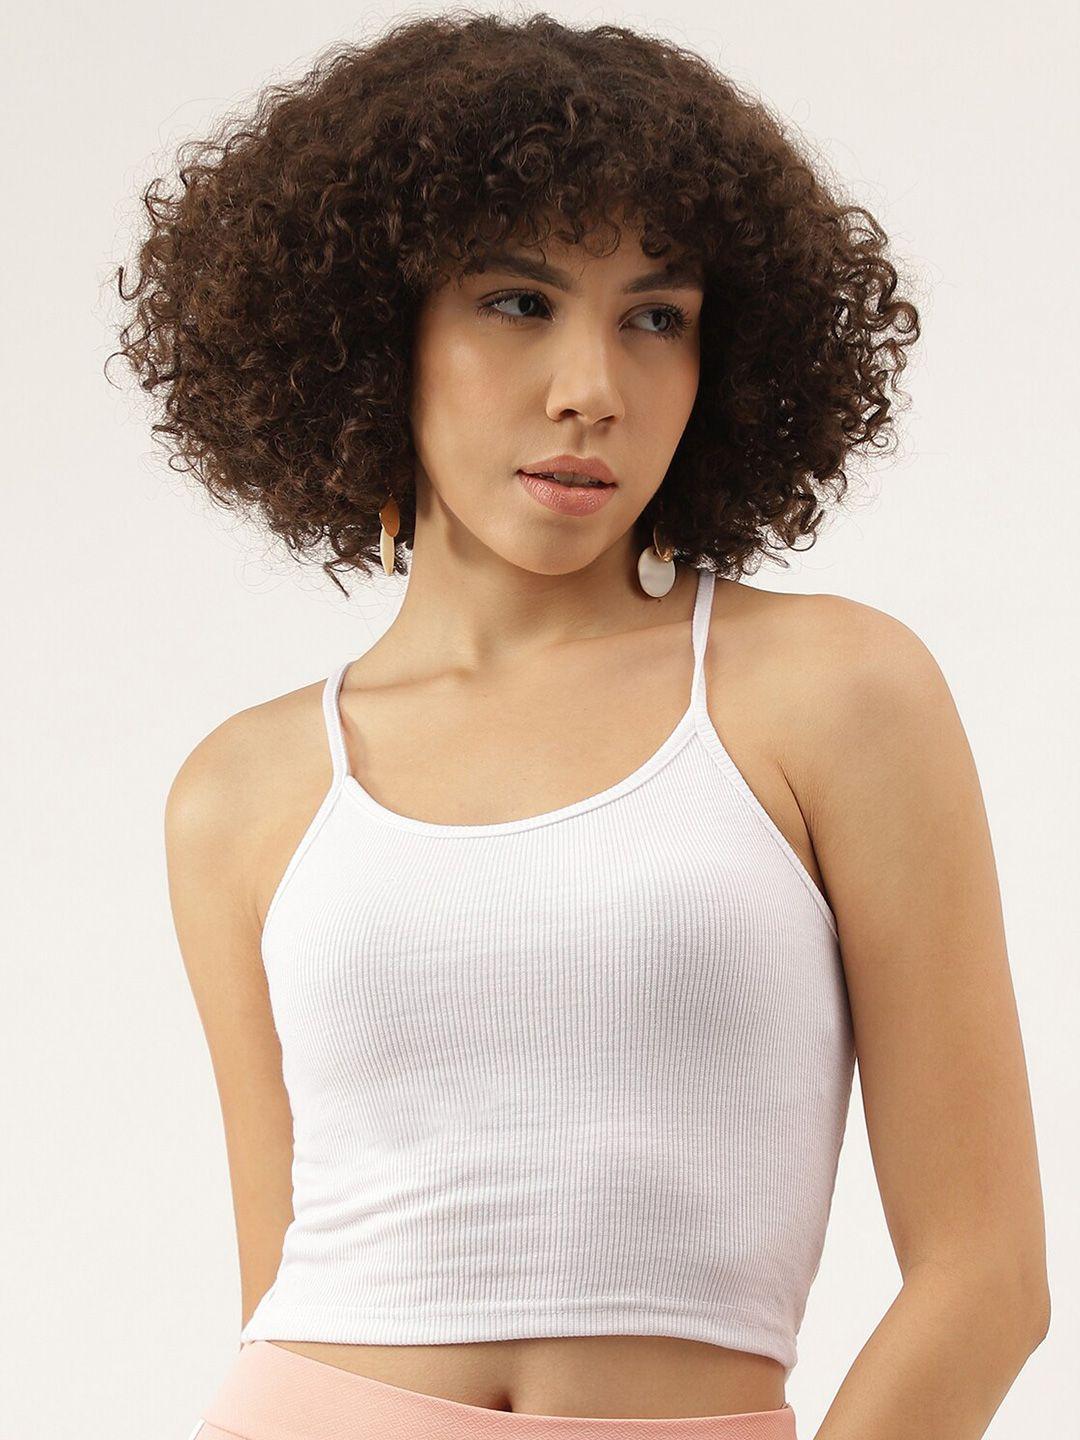 AAHWAN White Cotton Crop Top